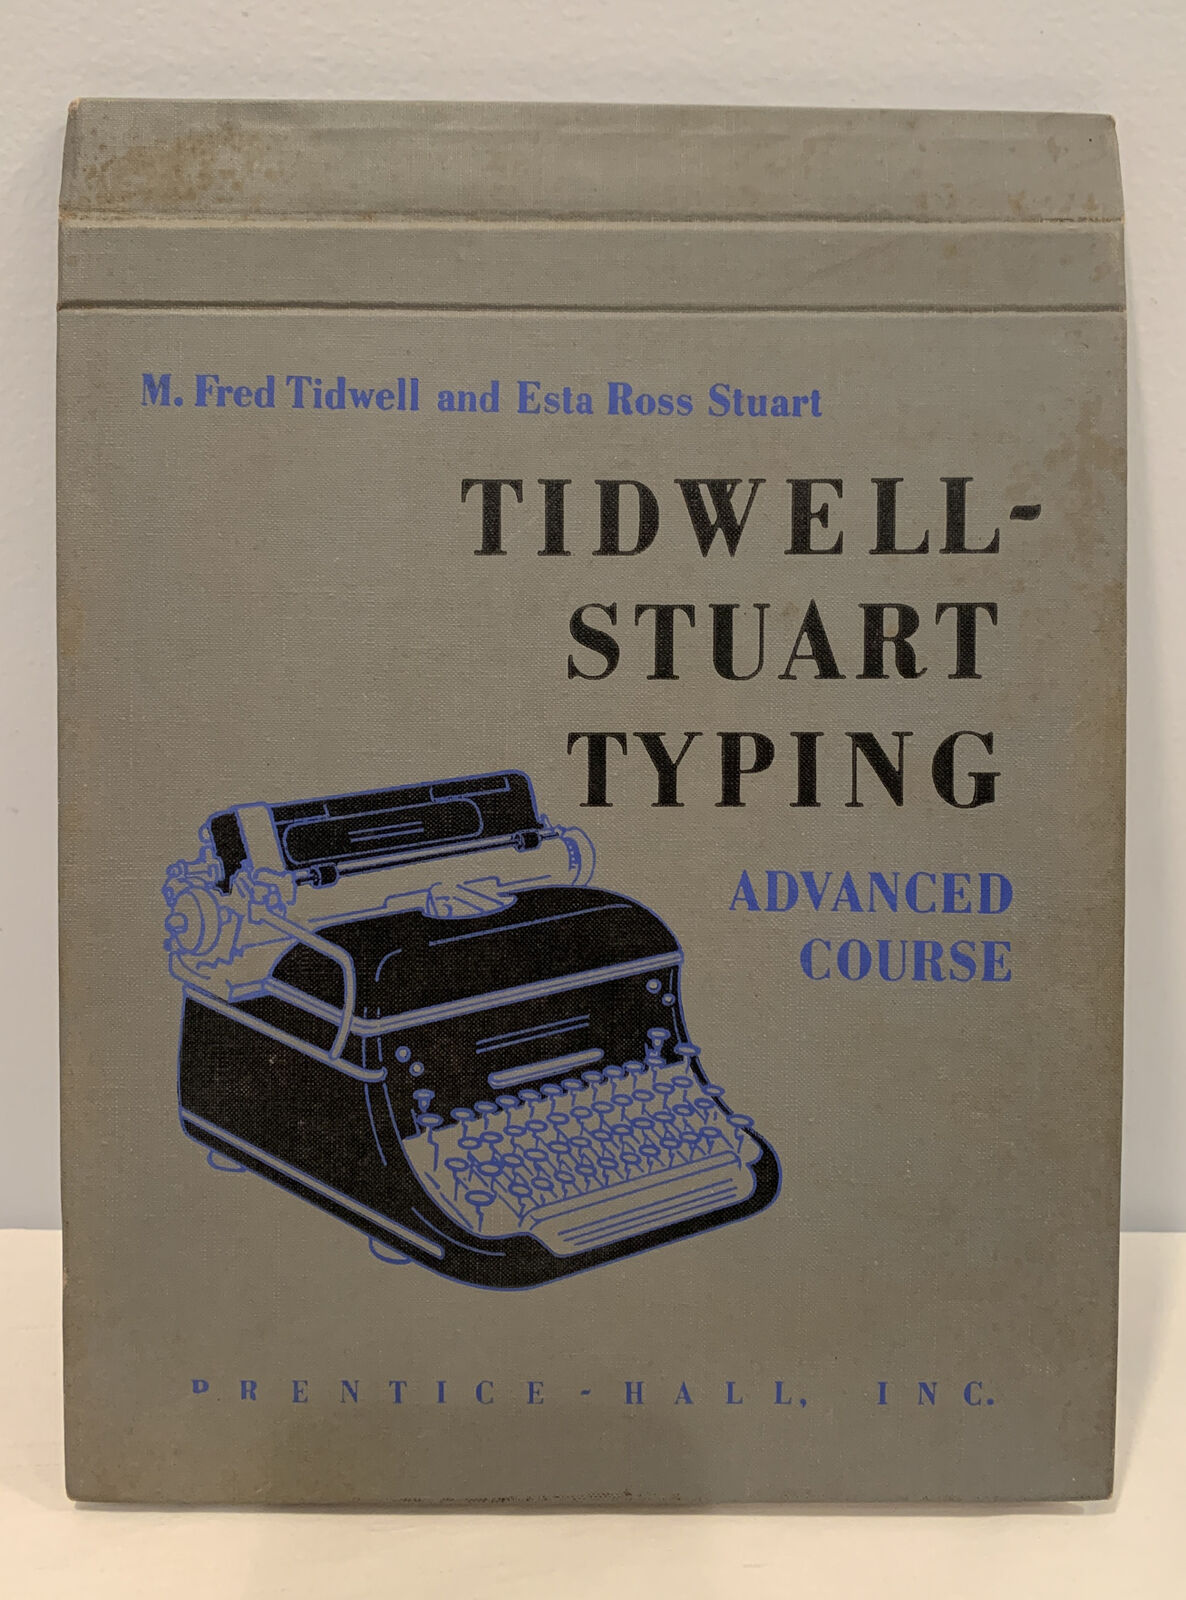 Vintage 1954 Tidwell-Stuart Typing Advanced Course By Prentice-Hall Inc.